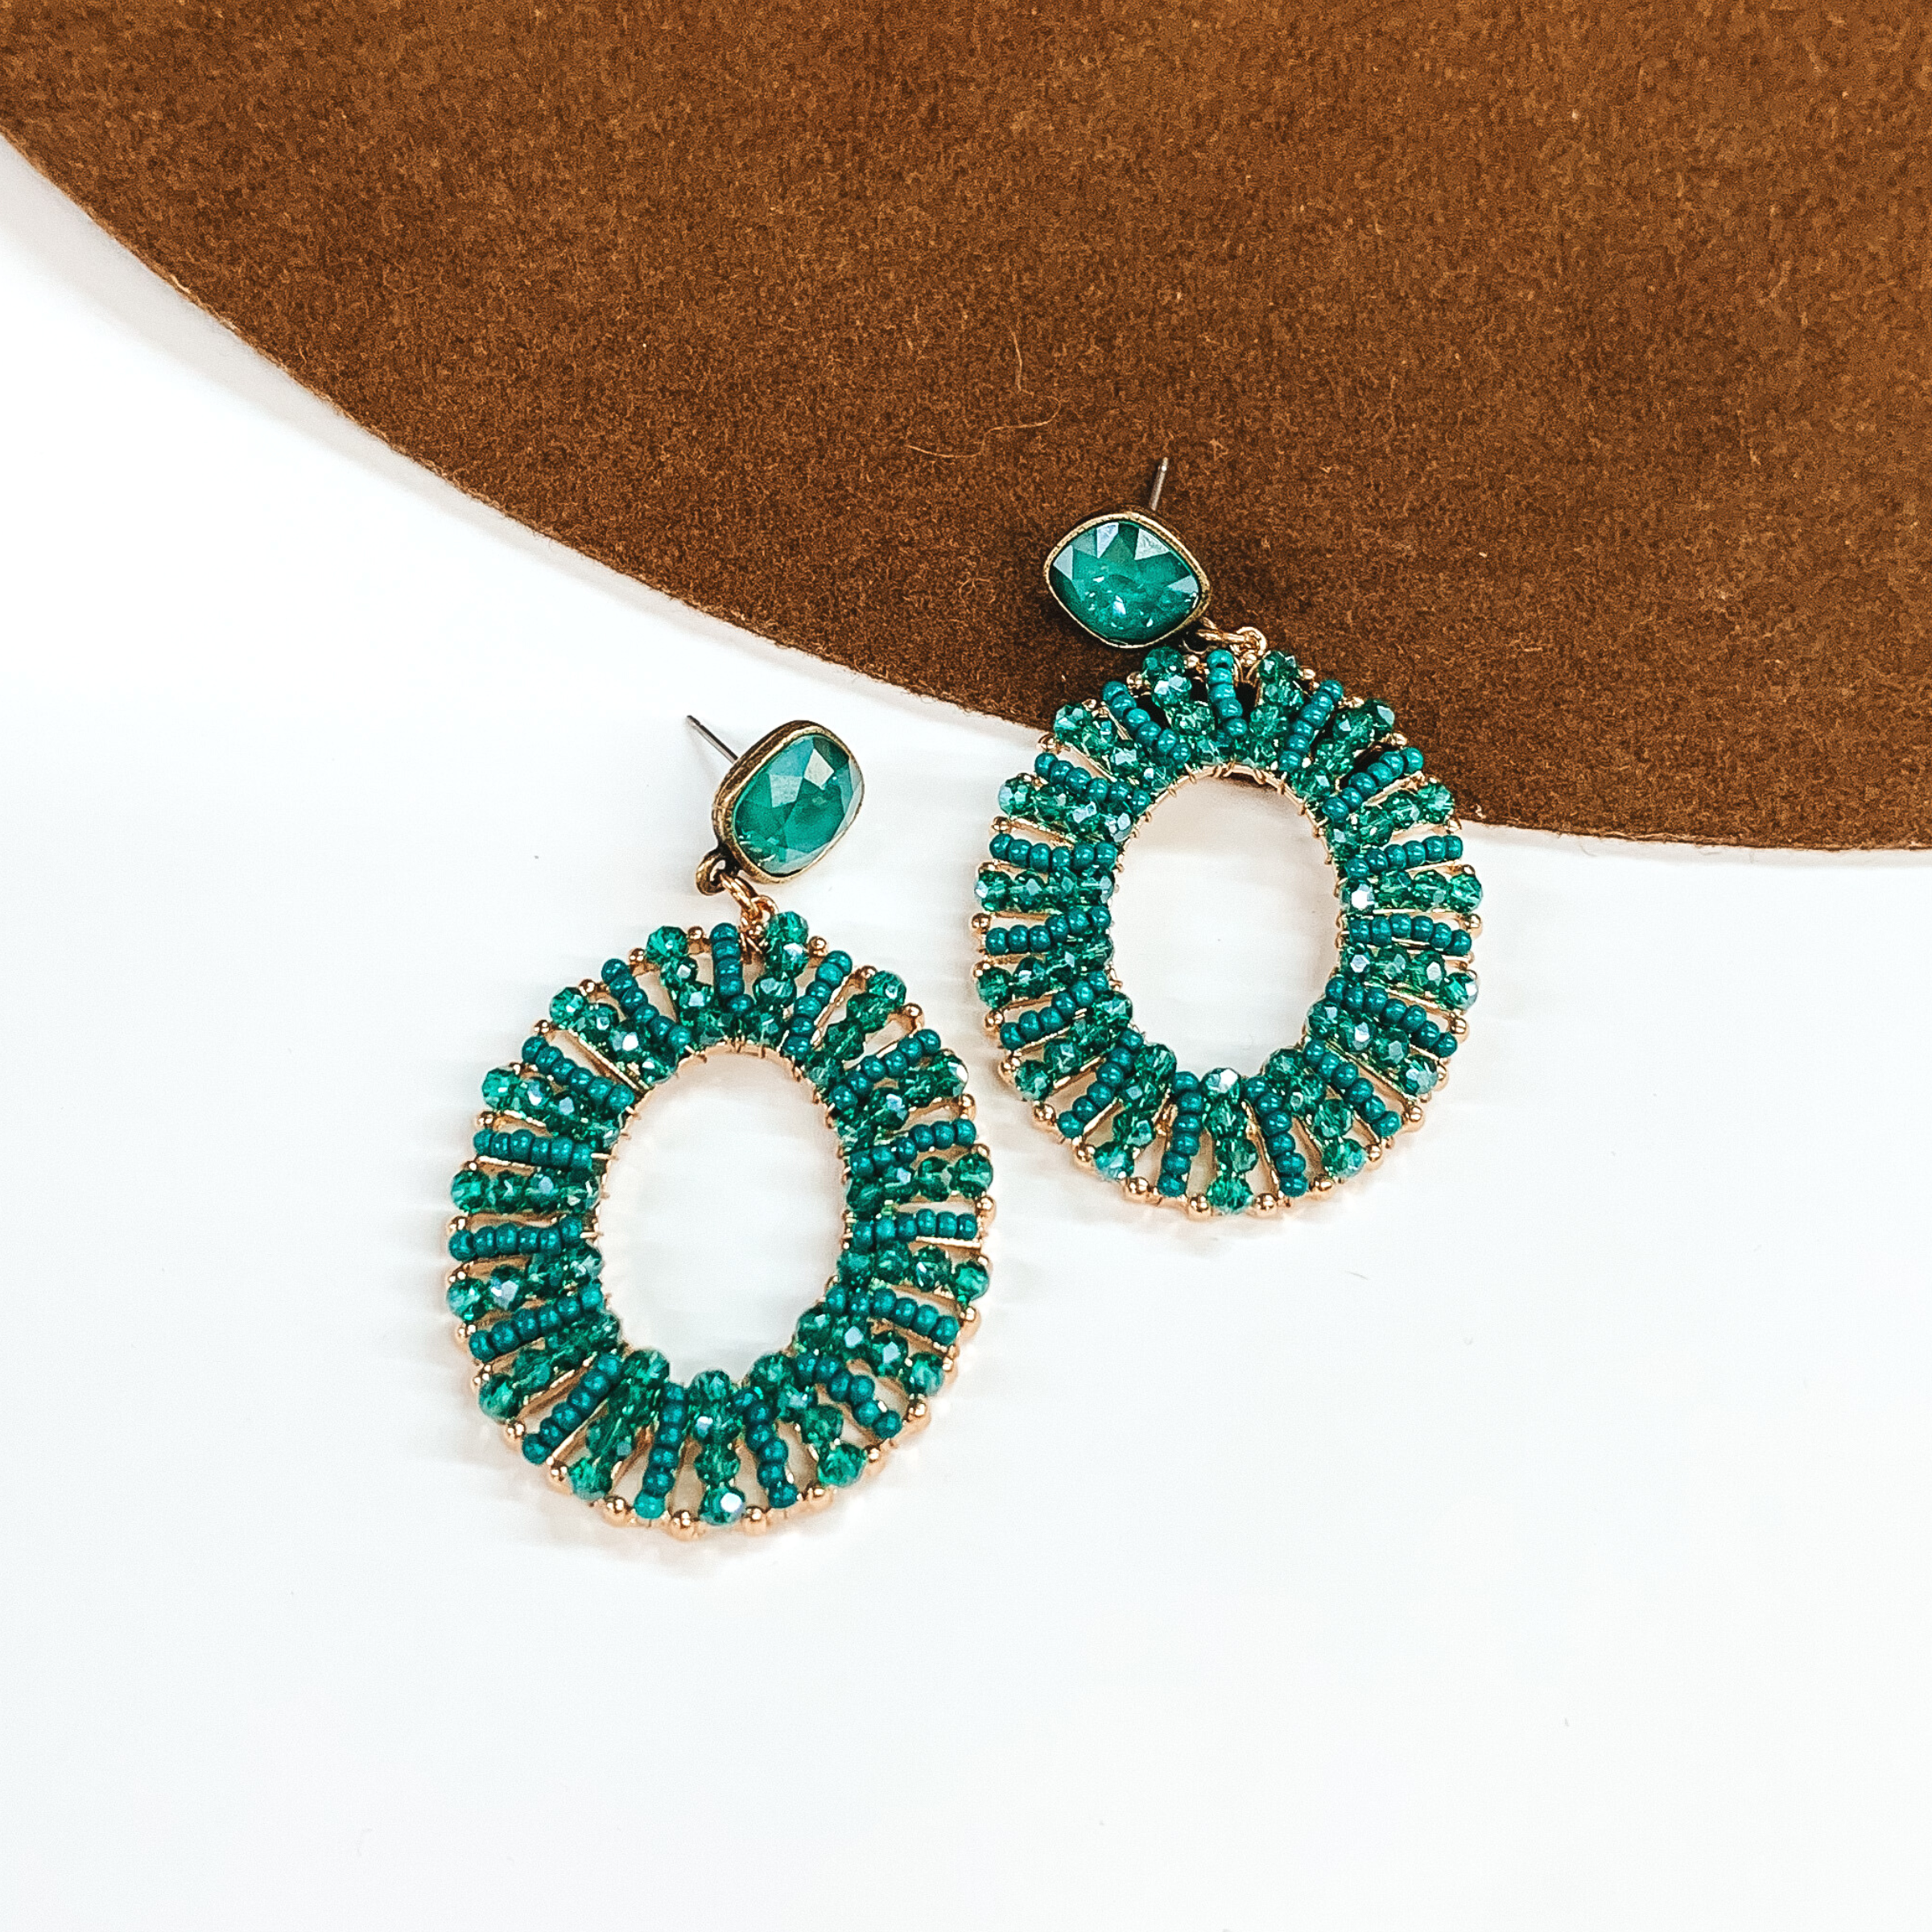 Pair of open oval, beaded earrings. These earrings include royal green cushion cut crystal stud earrings and the oval pendant has green beads. These earrings are pictured laying partially on a brown hat brim on a white background.